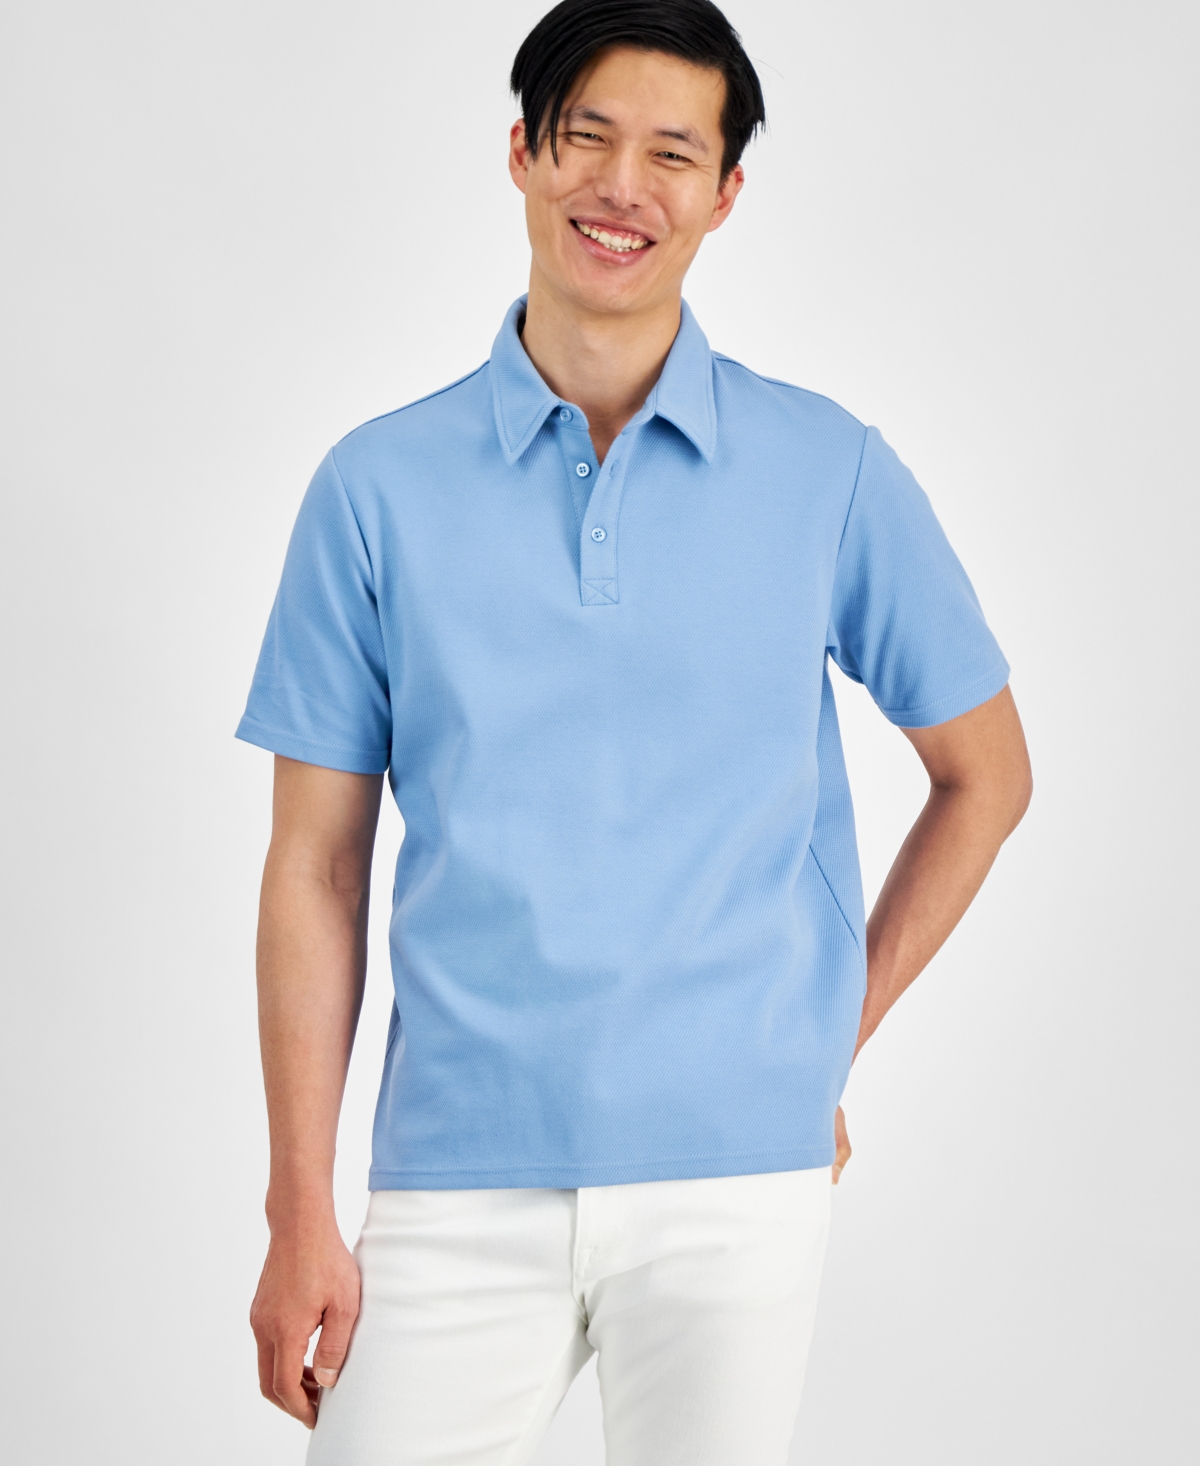 Men's Regular-Fit Solid Polo Shirt, Created for Macy's - Light Blue